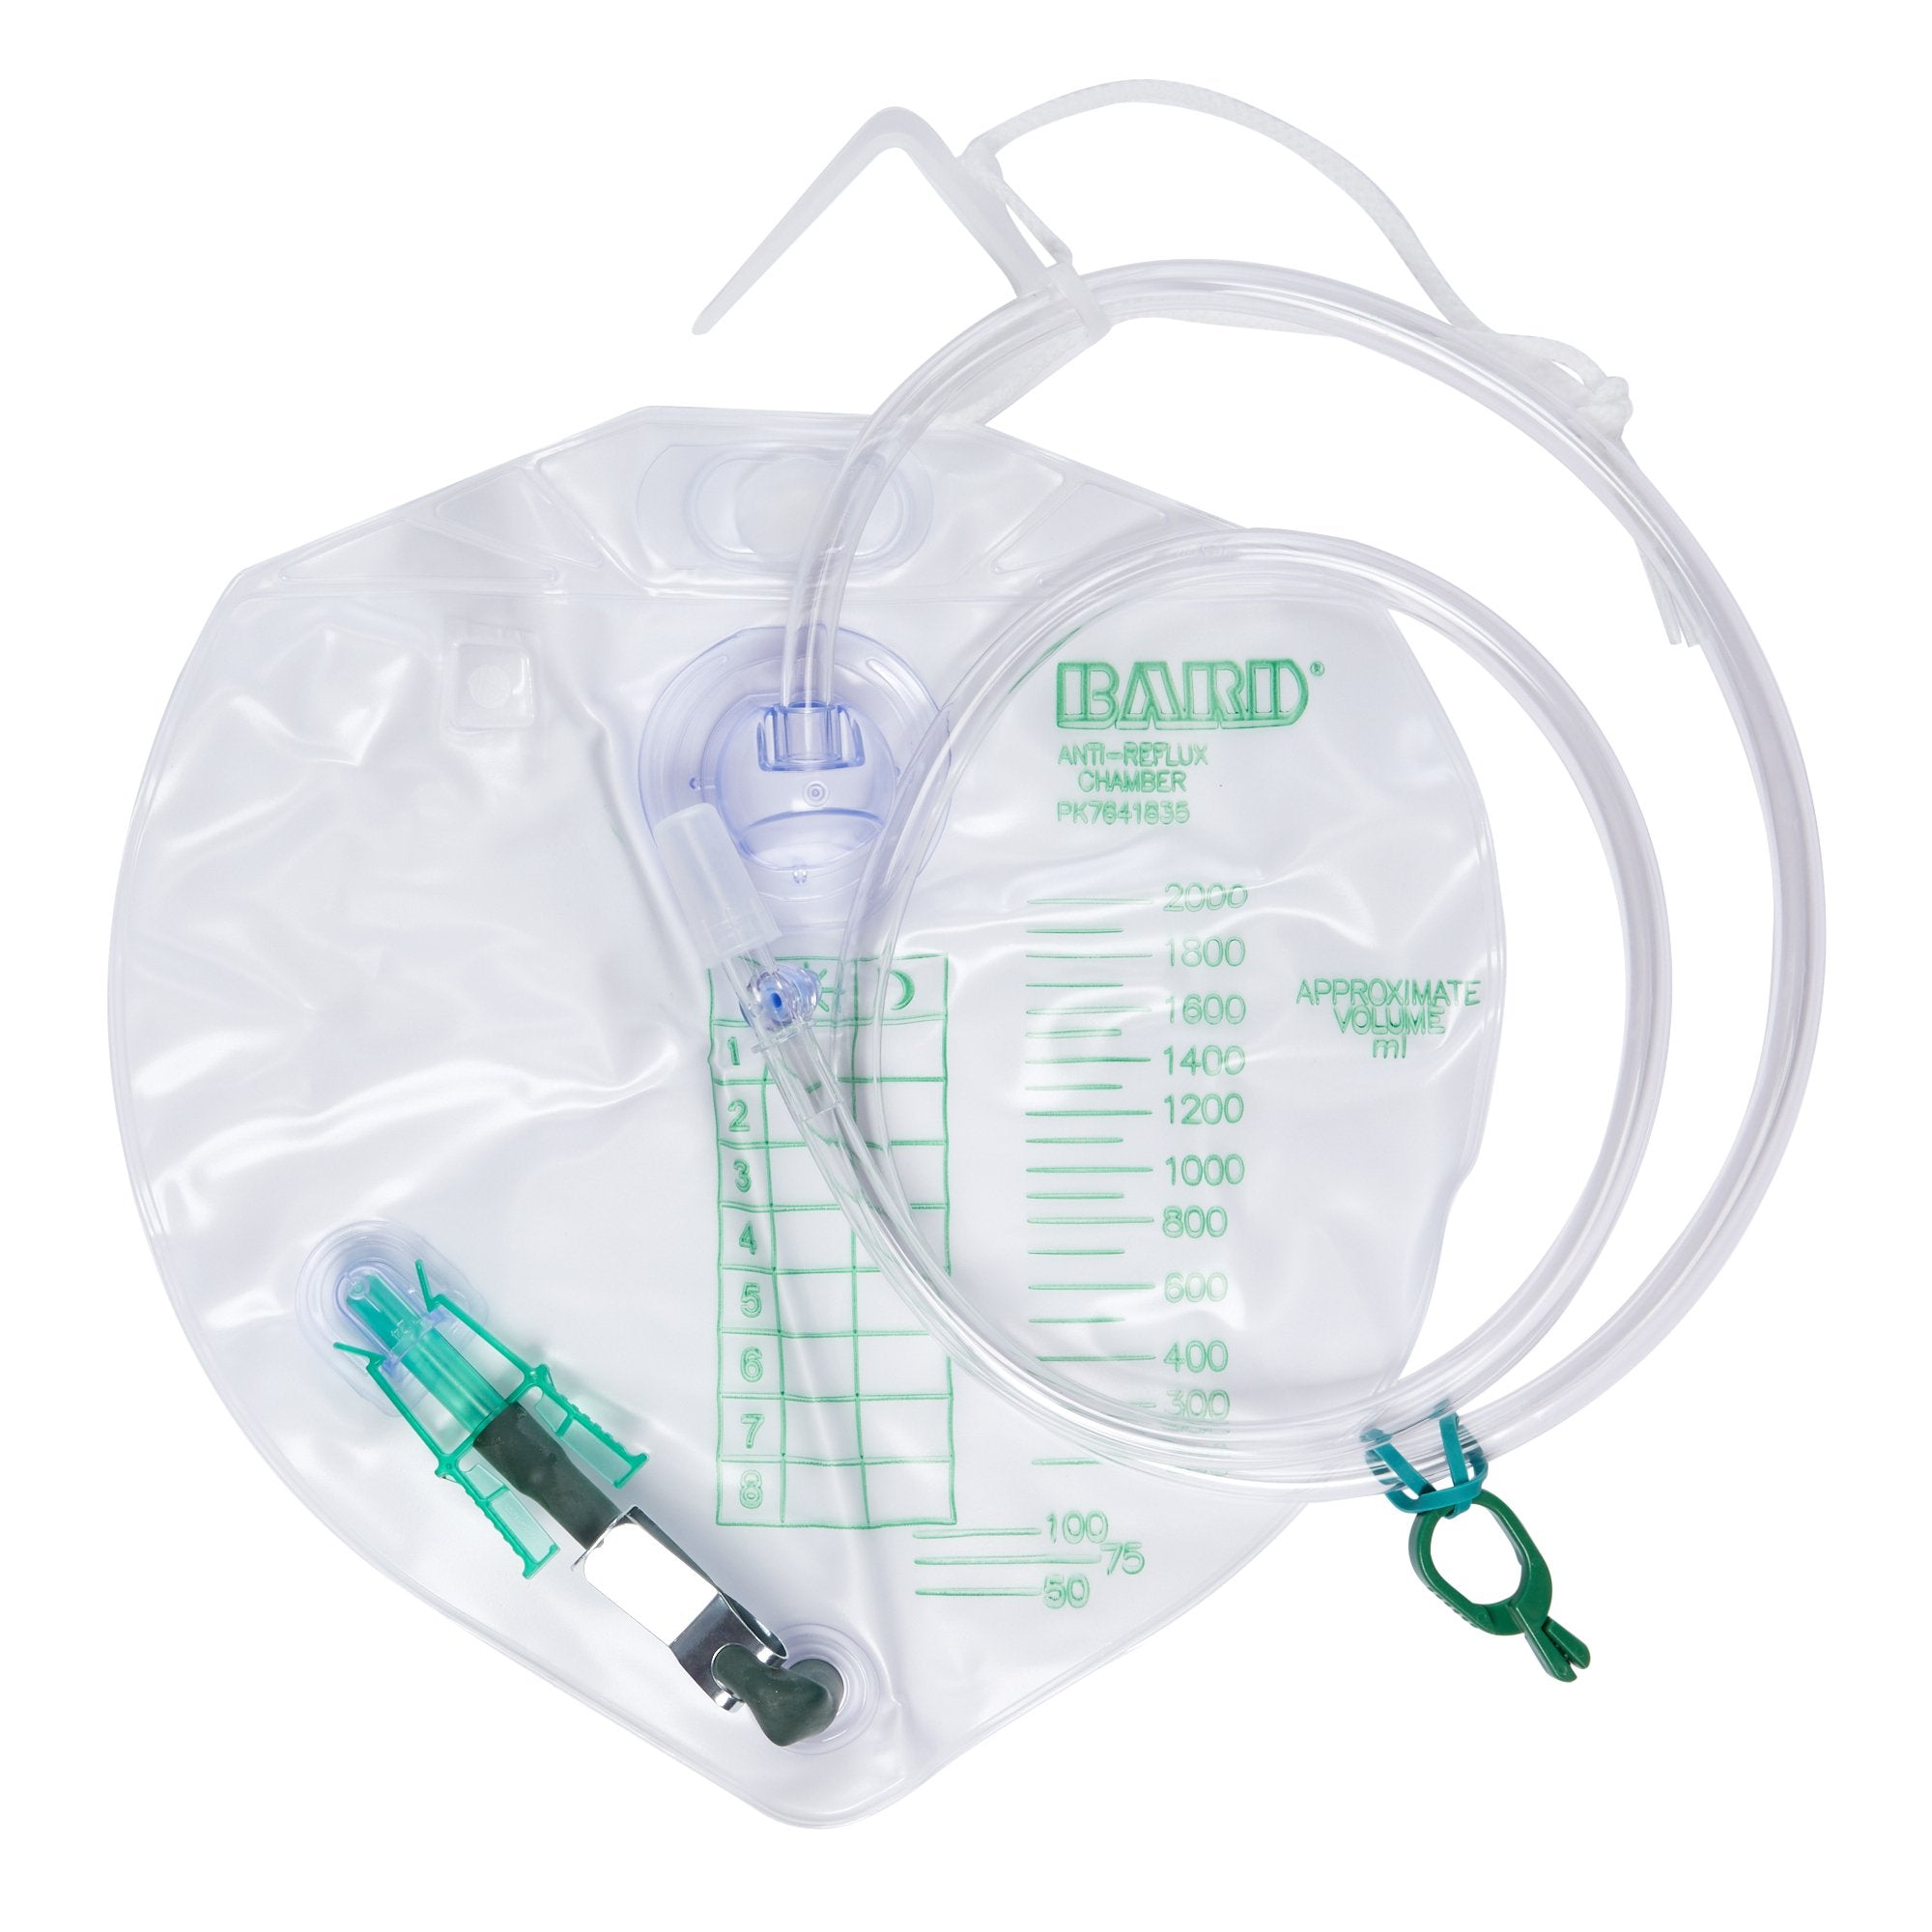 Bard I.C. Infection Control Urine Bedside Drainage Bag with Anti-Reflux Chamber